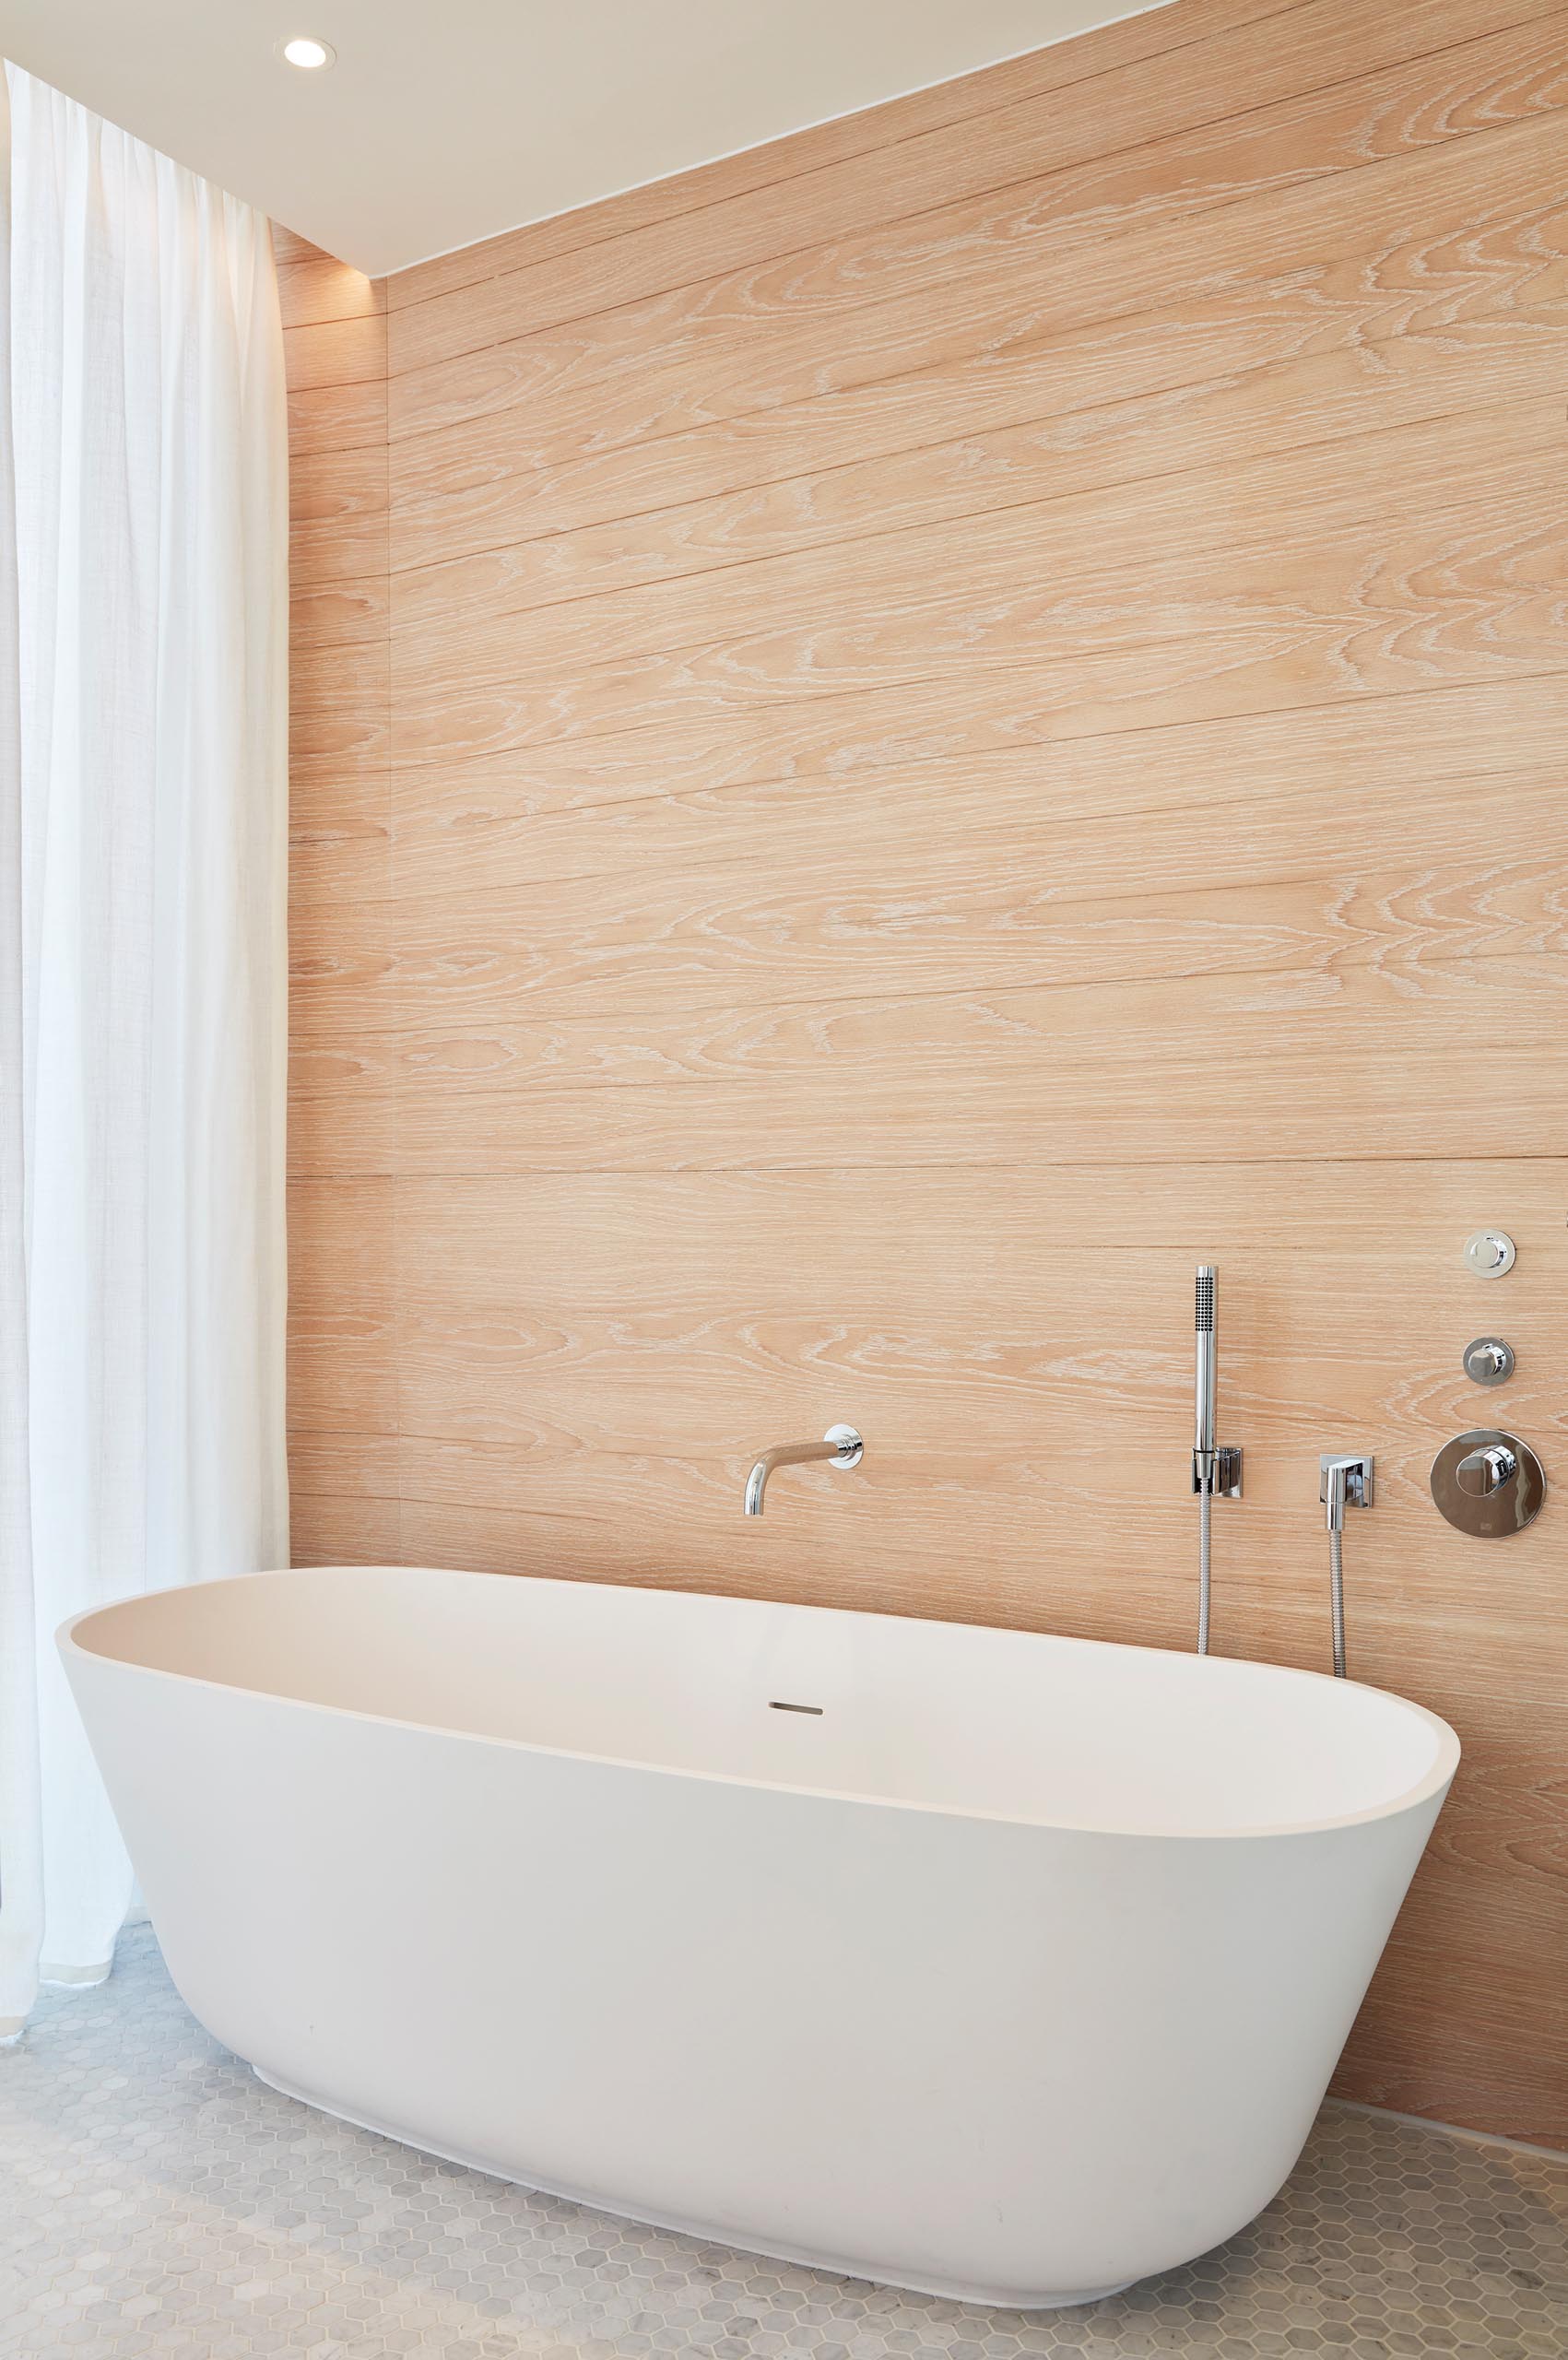 A wood accent wall acts as a backdrop for a freestanding white bathtub.